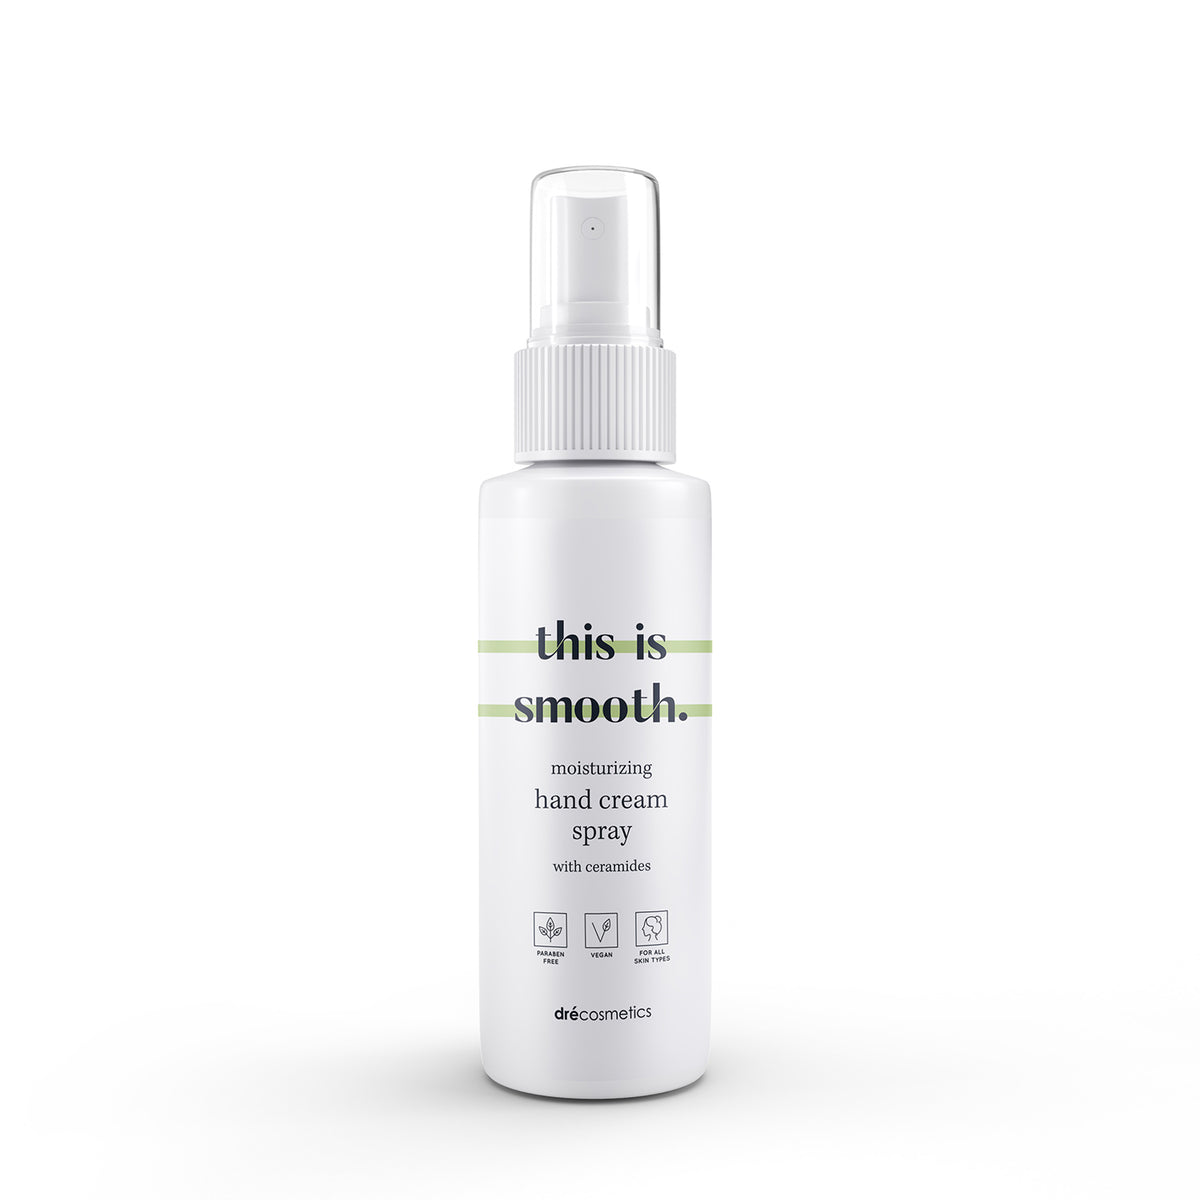 this is us. | hand cream spray "this is smooth"